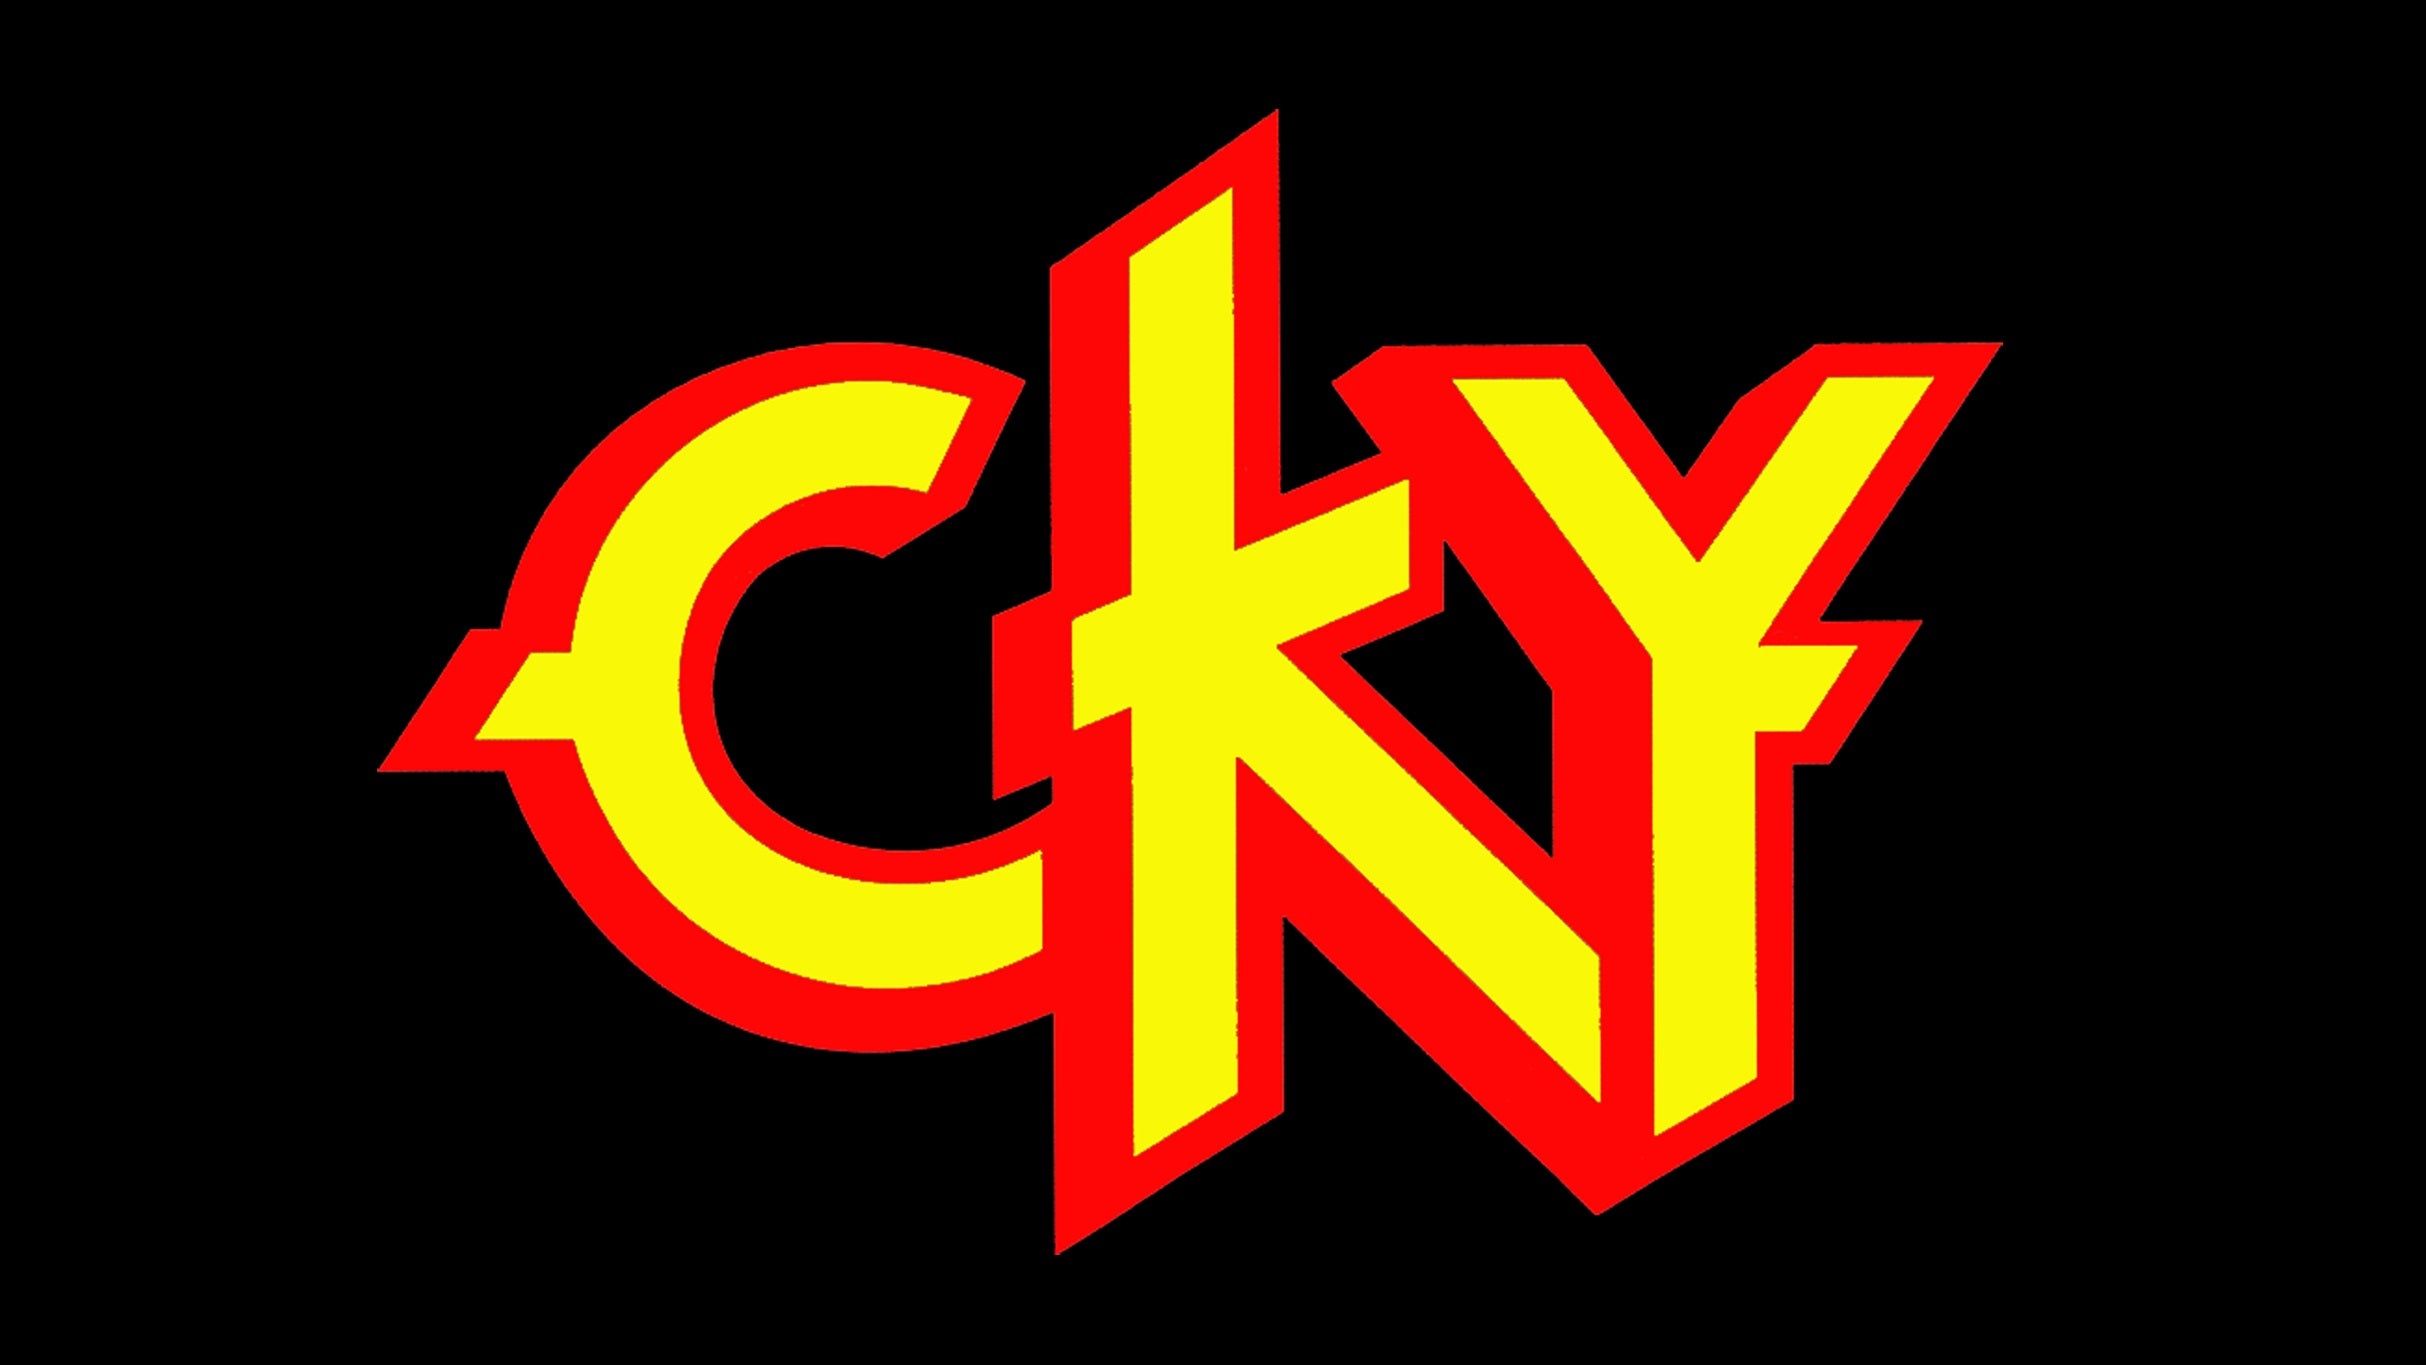 CKY - New Reason To Dream Tour at Pop's Concert Venue